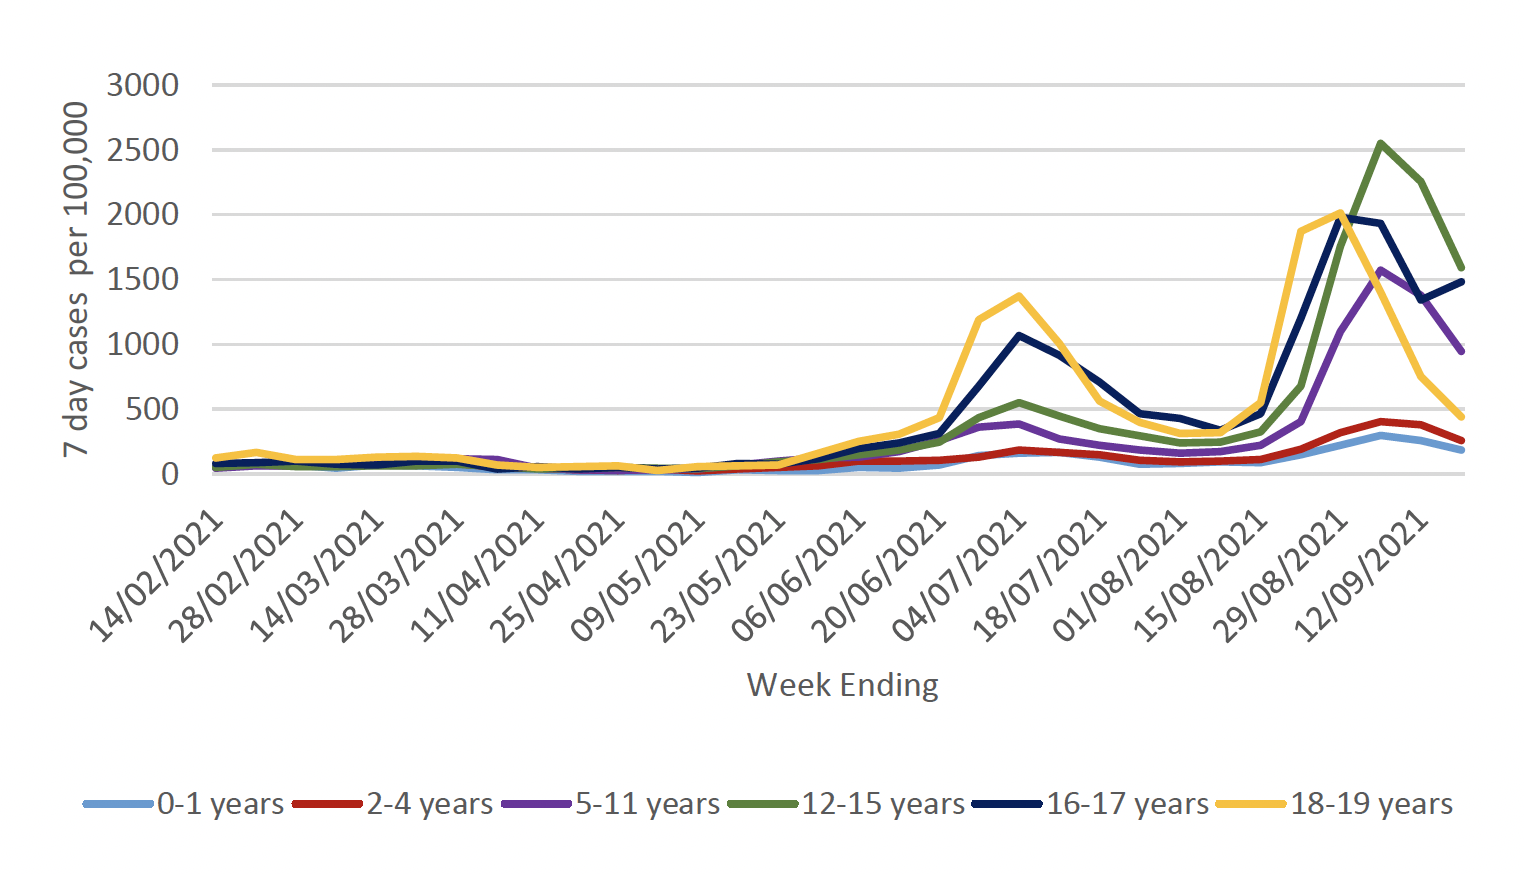 This figure shows the 7-day case rate of school pupils who tested positive for Covid-19, grouped in six age groups, during the period 14 February 2021 to 19 September 2021. The rates for all age groups have varied over time. Case rates remained relatively low from mid-February to May. They then started to increase in May and peaked in early July, with the highest case rate among 18-19 year olds. The rates decreased across all age groups in late July. Case rates then started to rise at the beginning of August 2021, reaching the peak early September. In the latest week ending 19 September, the 7 day case rates declined in all age groups, except for 16-17 year olds.  